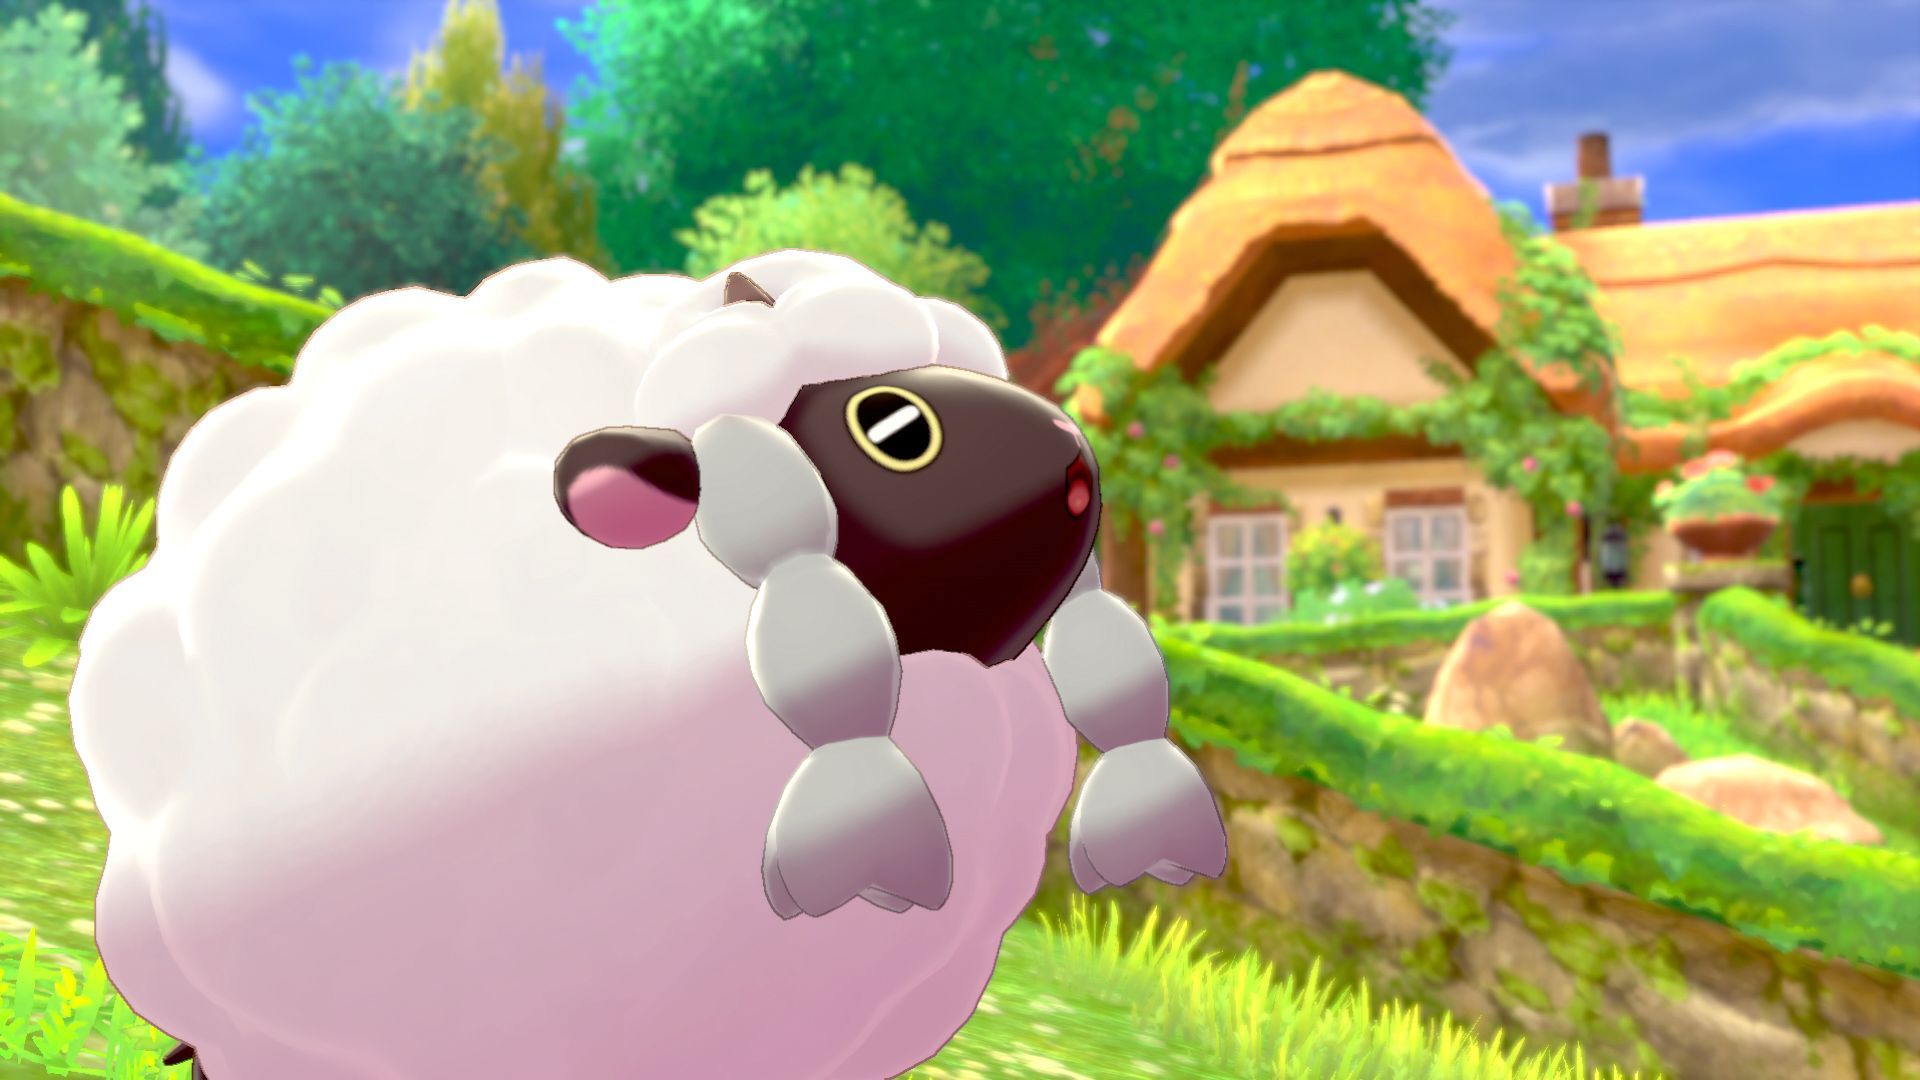 Pokémon Sword & Shield No National Dex Is Better For The Series